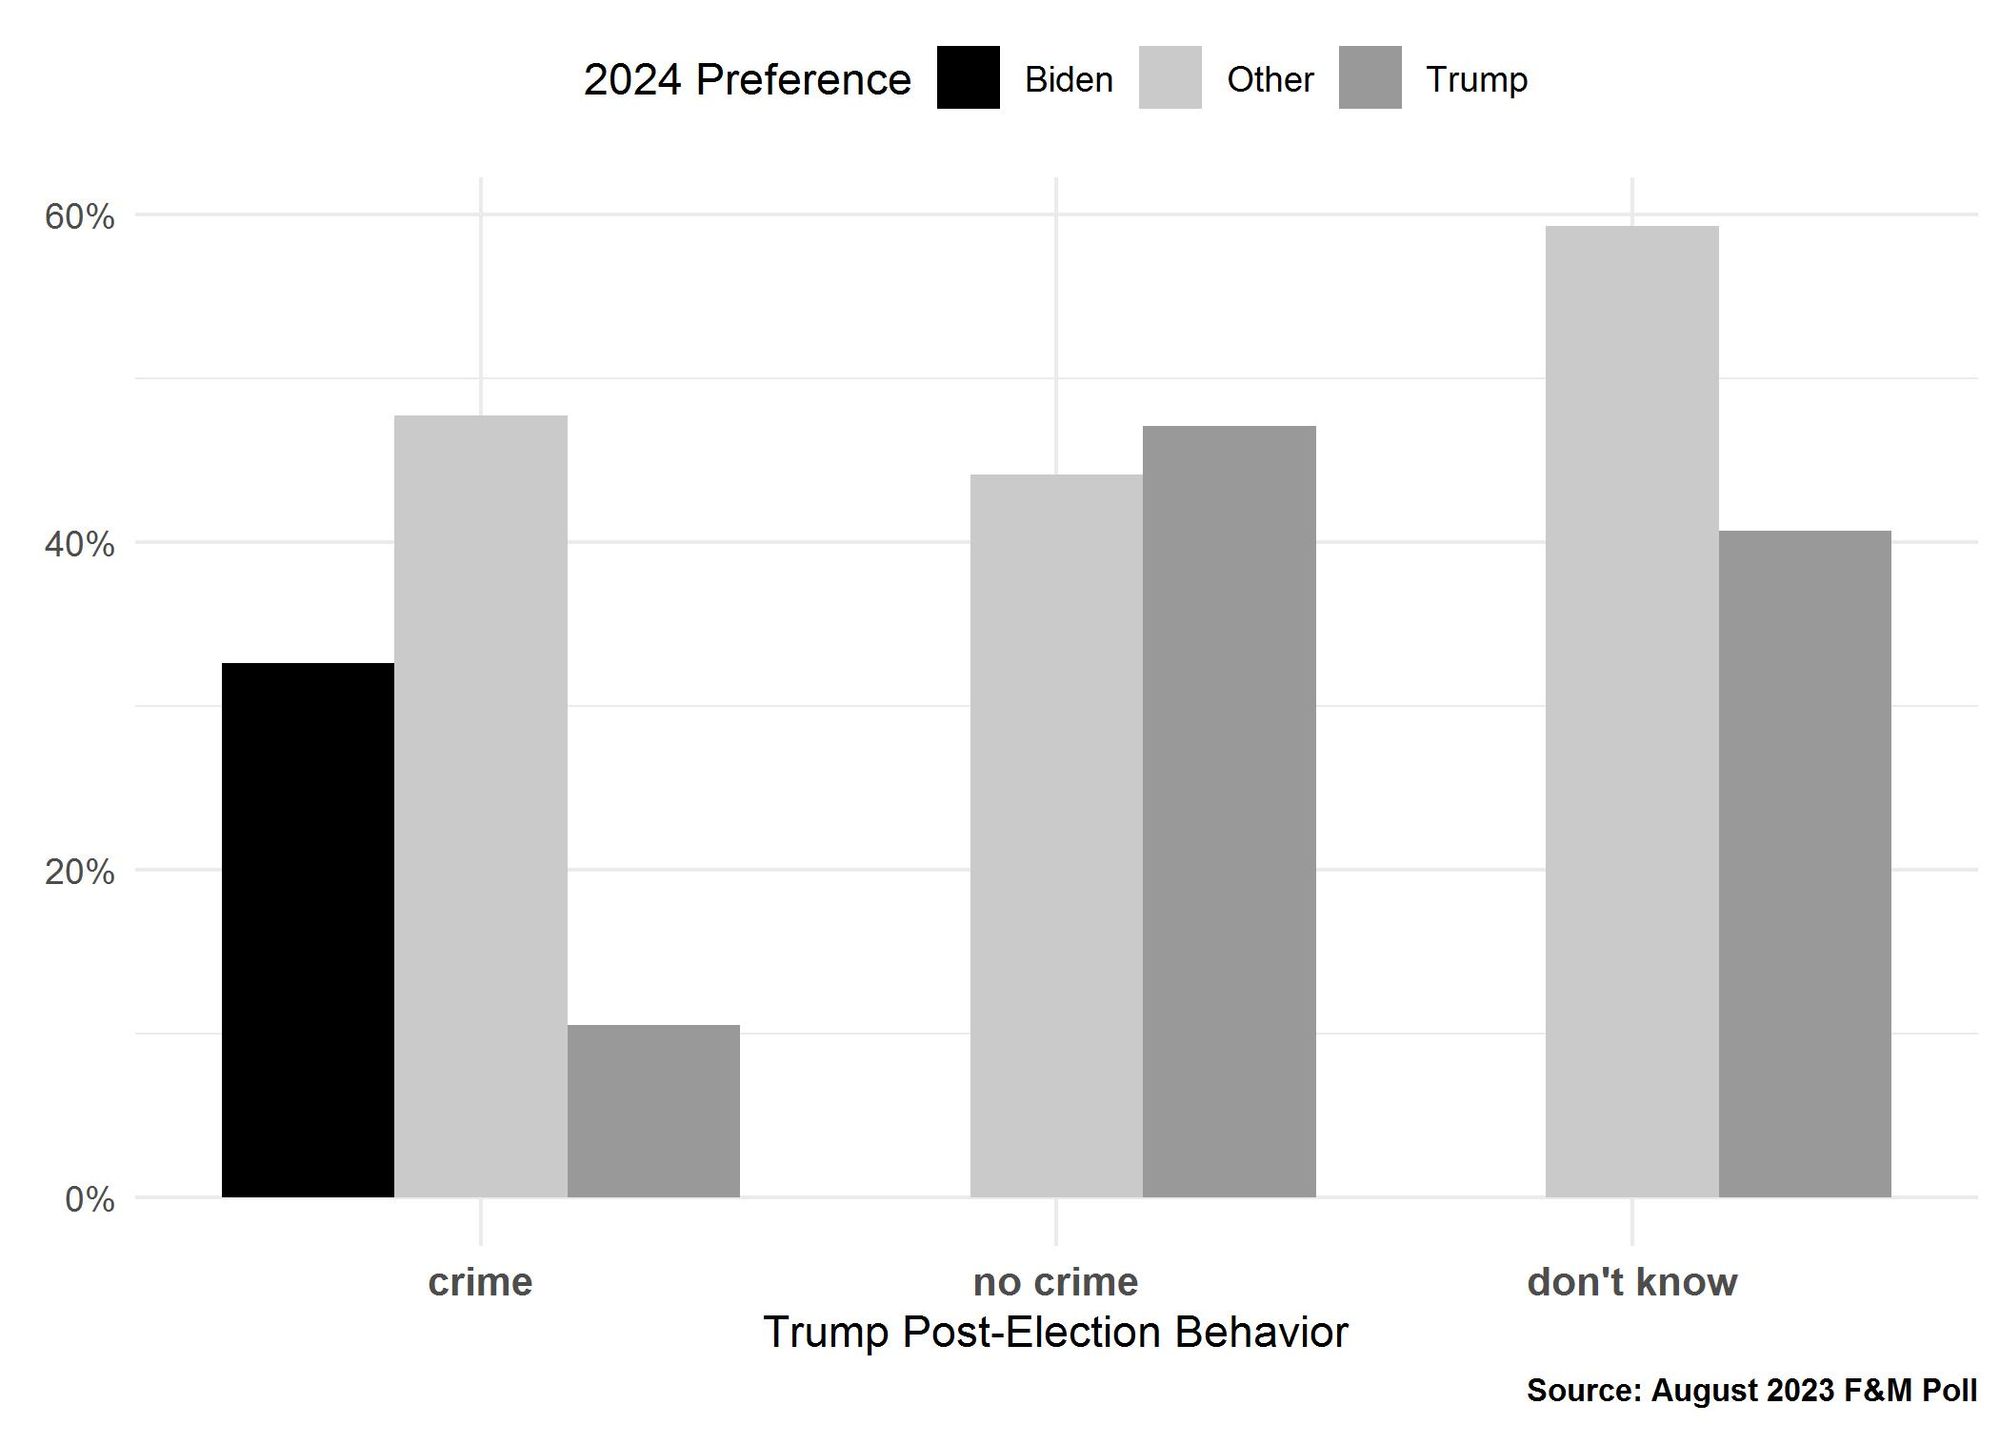 Figure 2. Bar graph showing Pennsylvania voters’ assessments of whether former President Trump committed crimes or not, and 2024 presidential candidate preference, among the 23% who had an "unfavorable" opinion of both candidates in the August 2023 F&M Poll. The bars represent the proportion of voters in each group--crime, no crime, or don't know--who prefer President Biden, former President Trump, or another candidate.